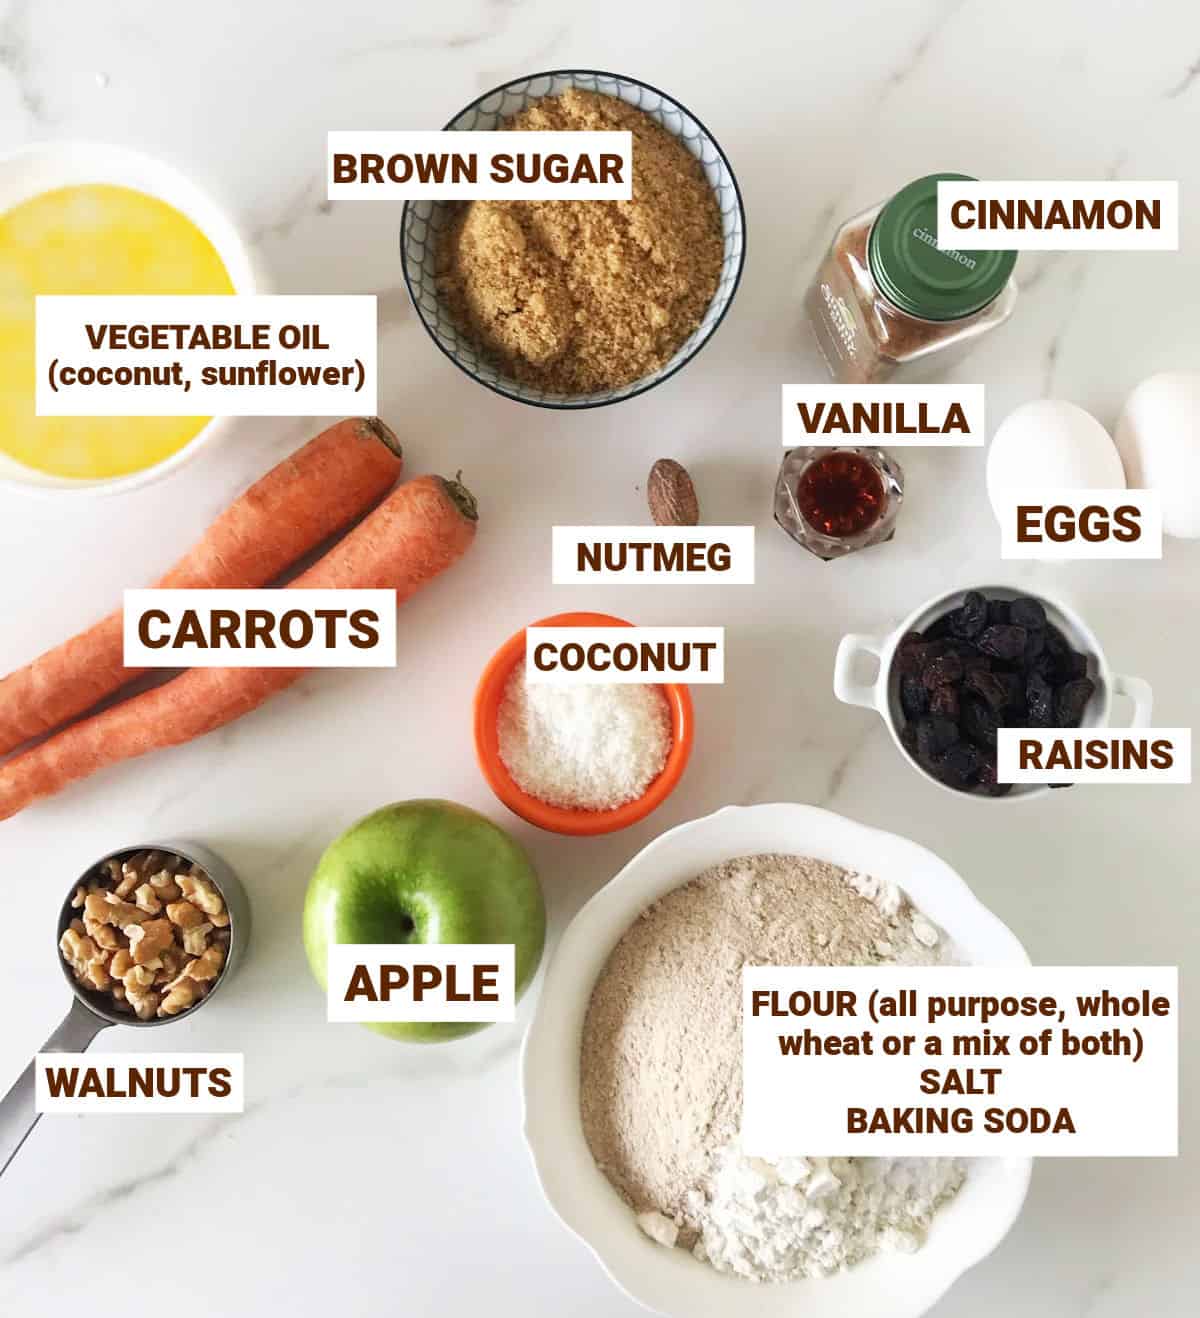 Ingredients in bowls on white marble surface including apple, carrots, oil, spices, walnuts, flour, raisins, sugar